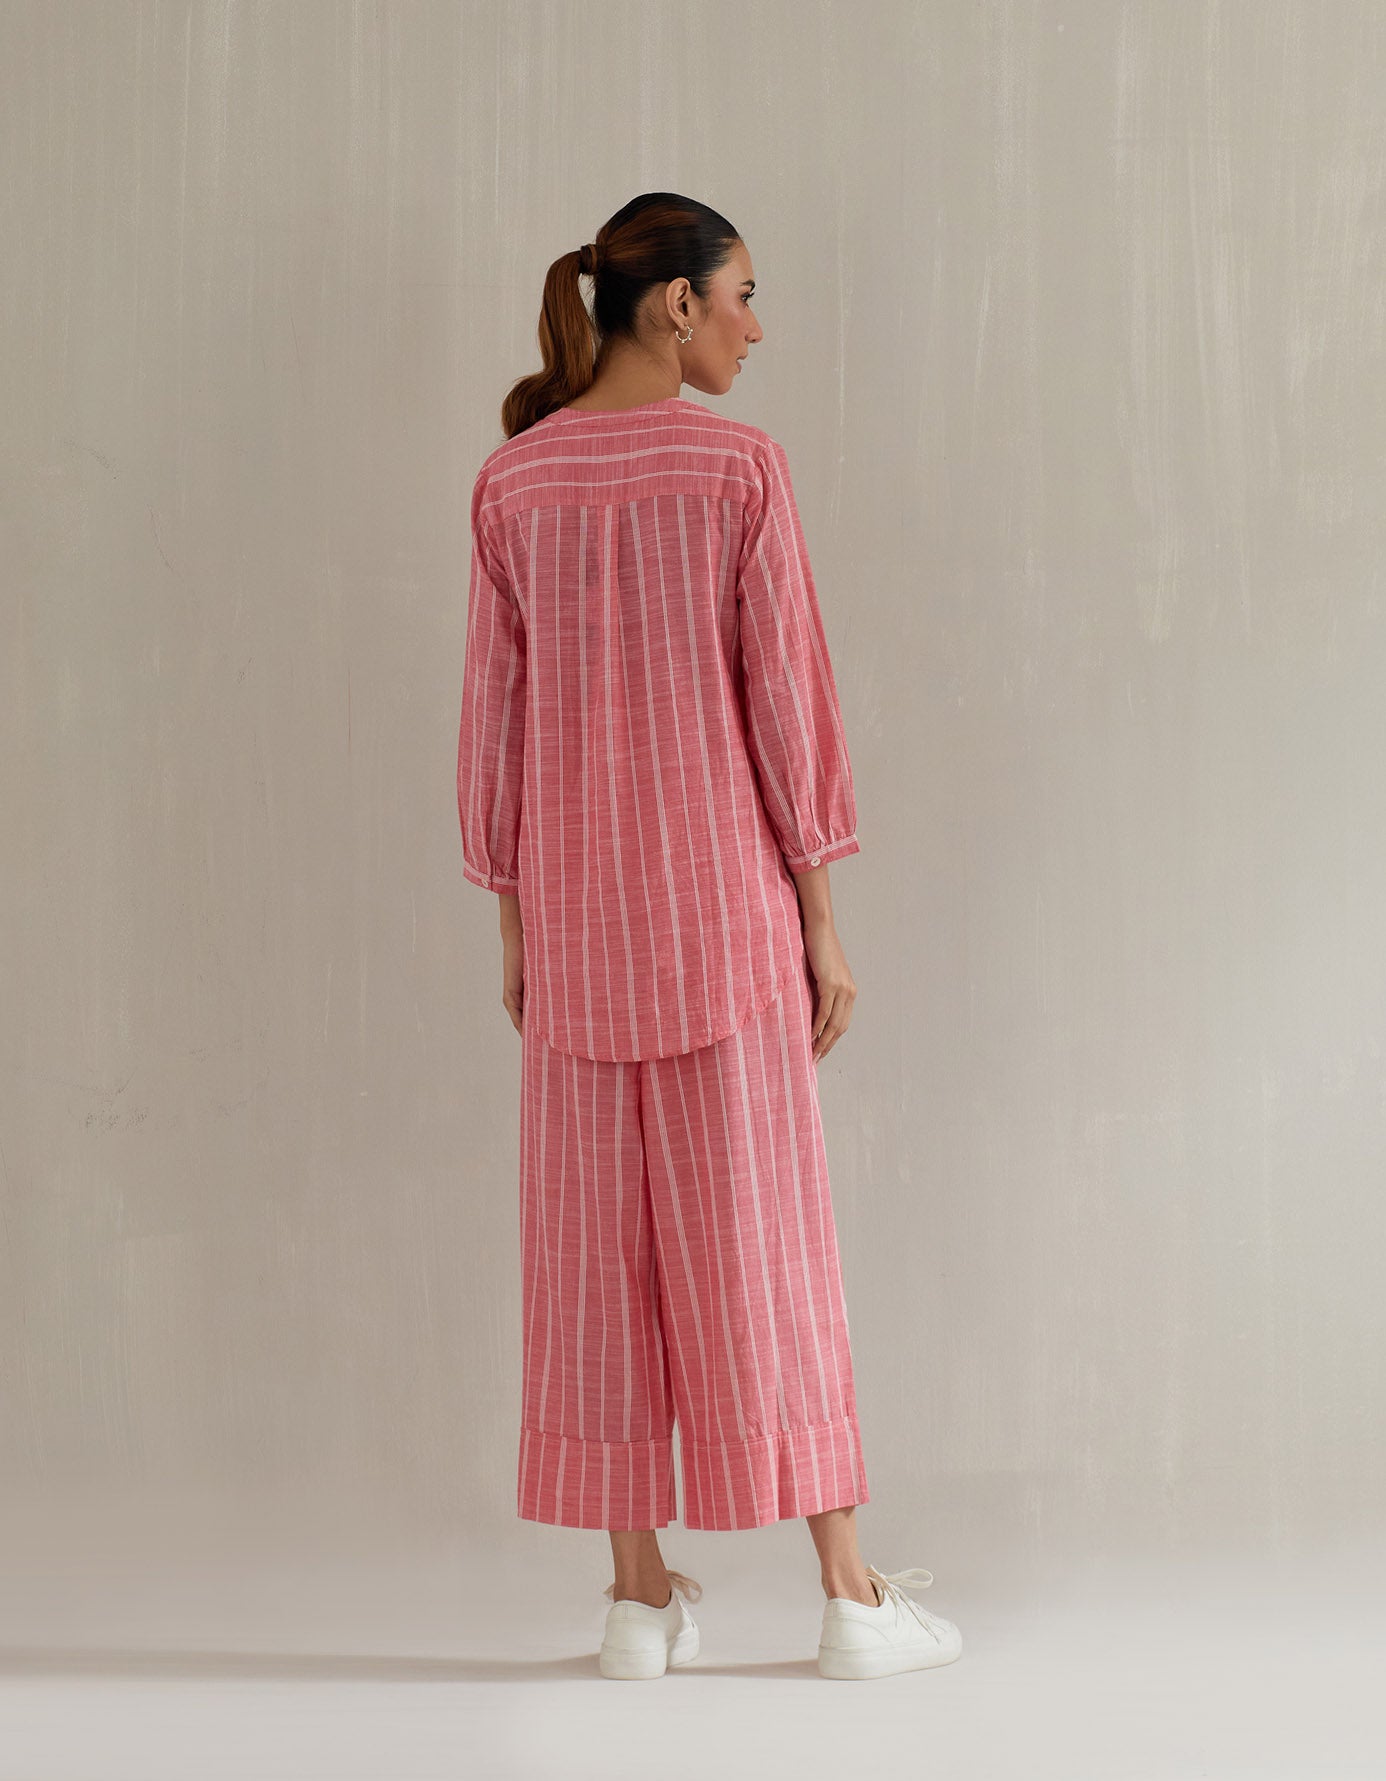 Blues and Pink Stripe Top with Pant